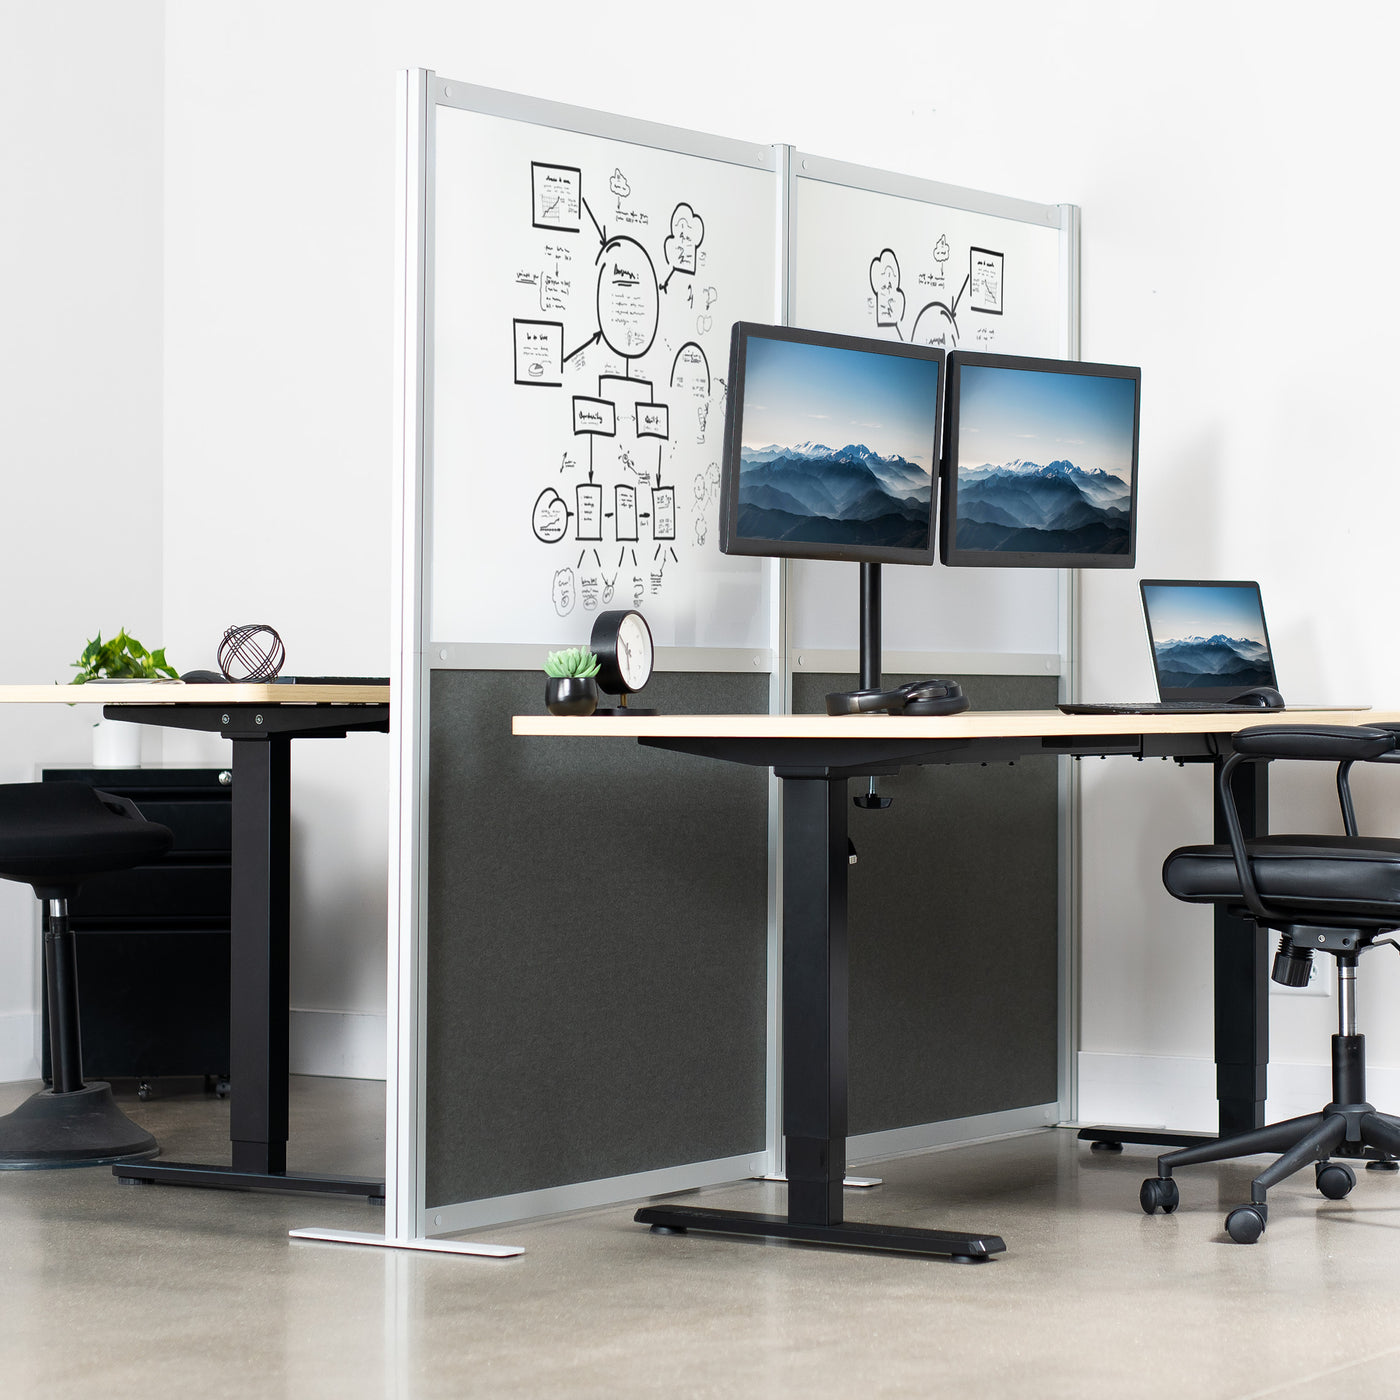 Freestanding privacy panels with whiteboard surfaces for an ergonomic office partition solution.